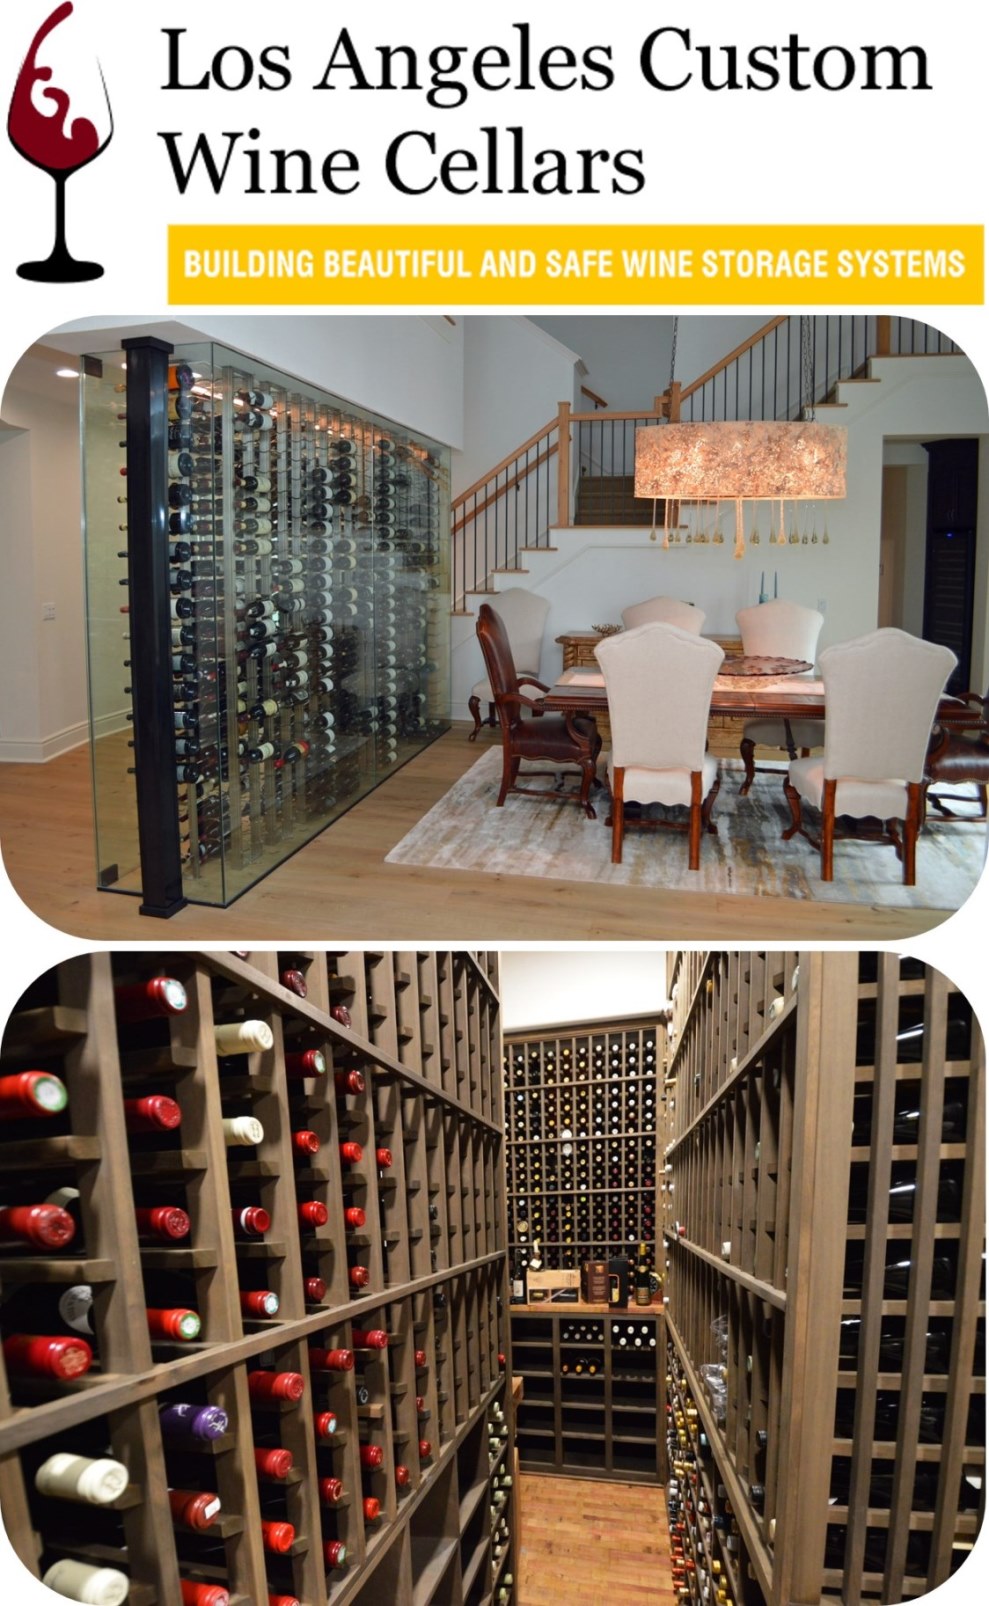 Work with a Professional Wine Cellar Builder in Designing Your Wine Racks 